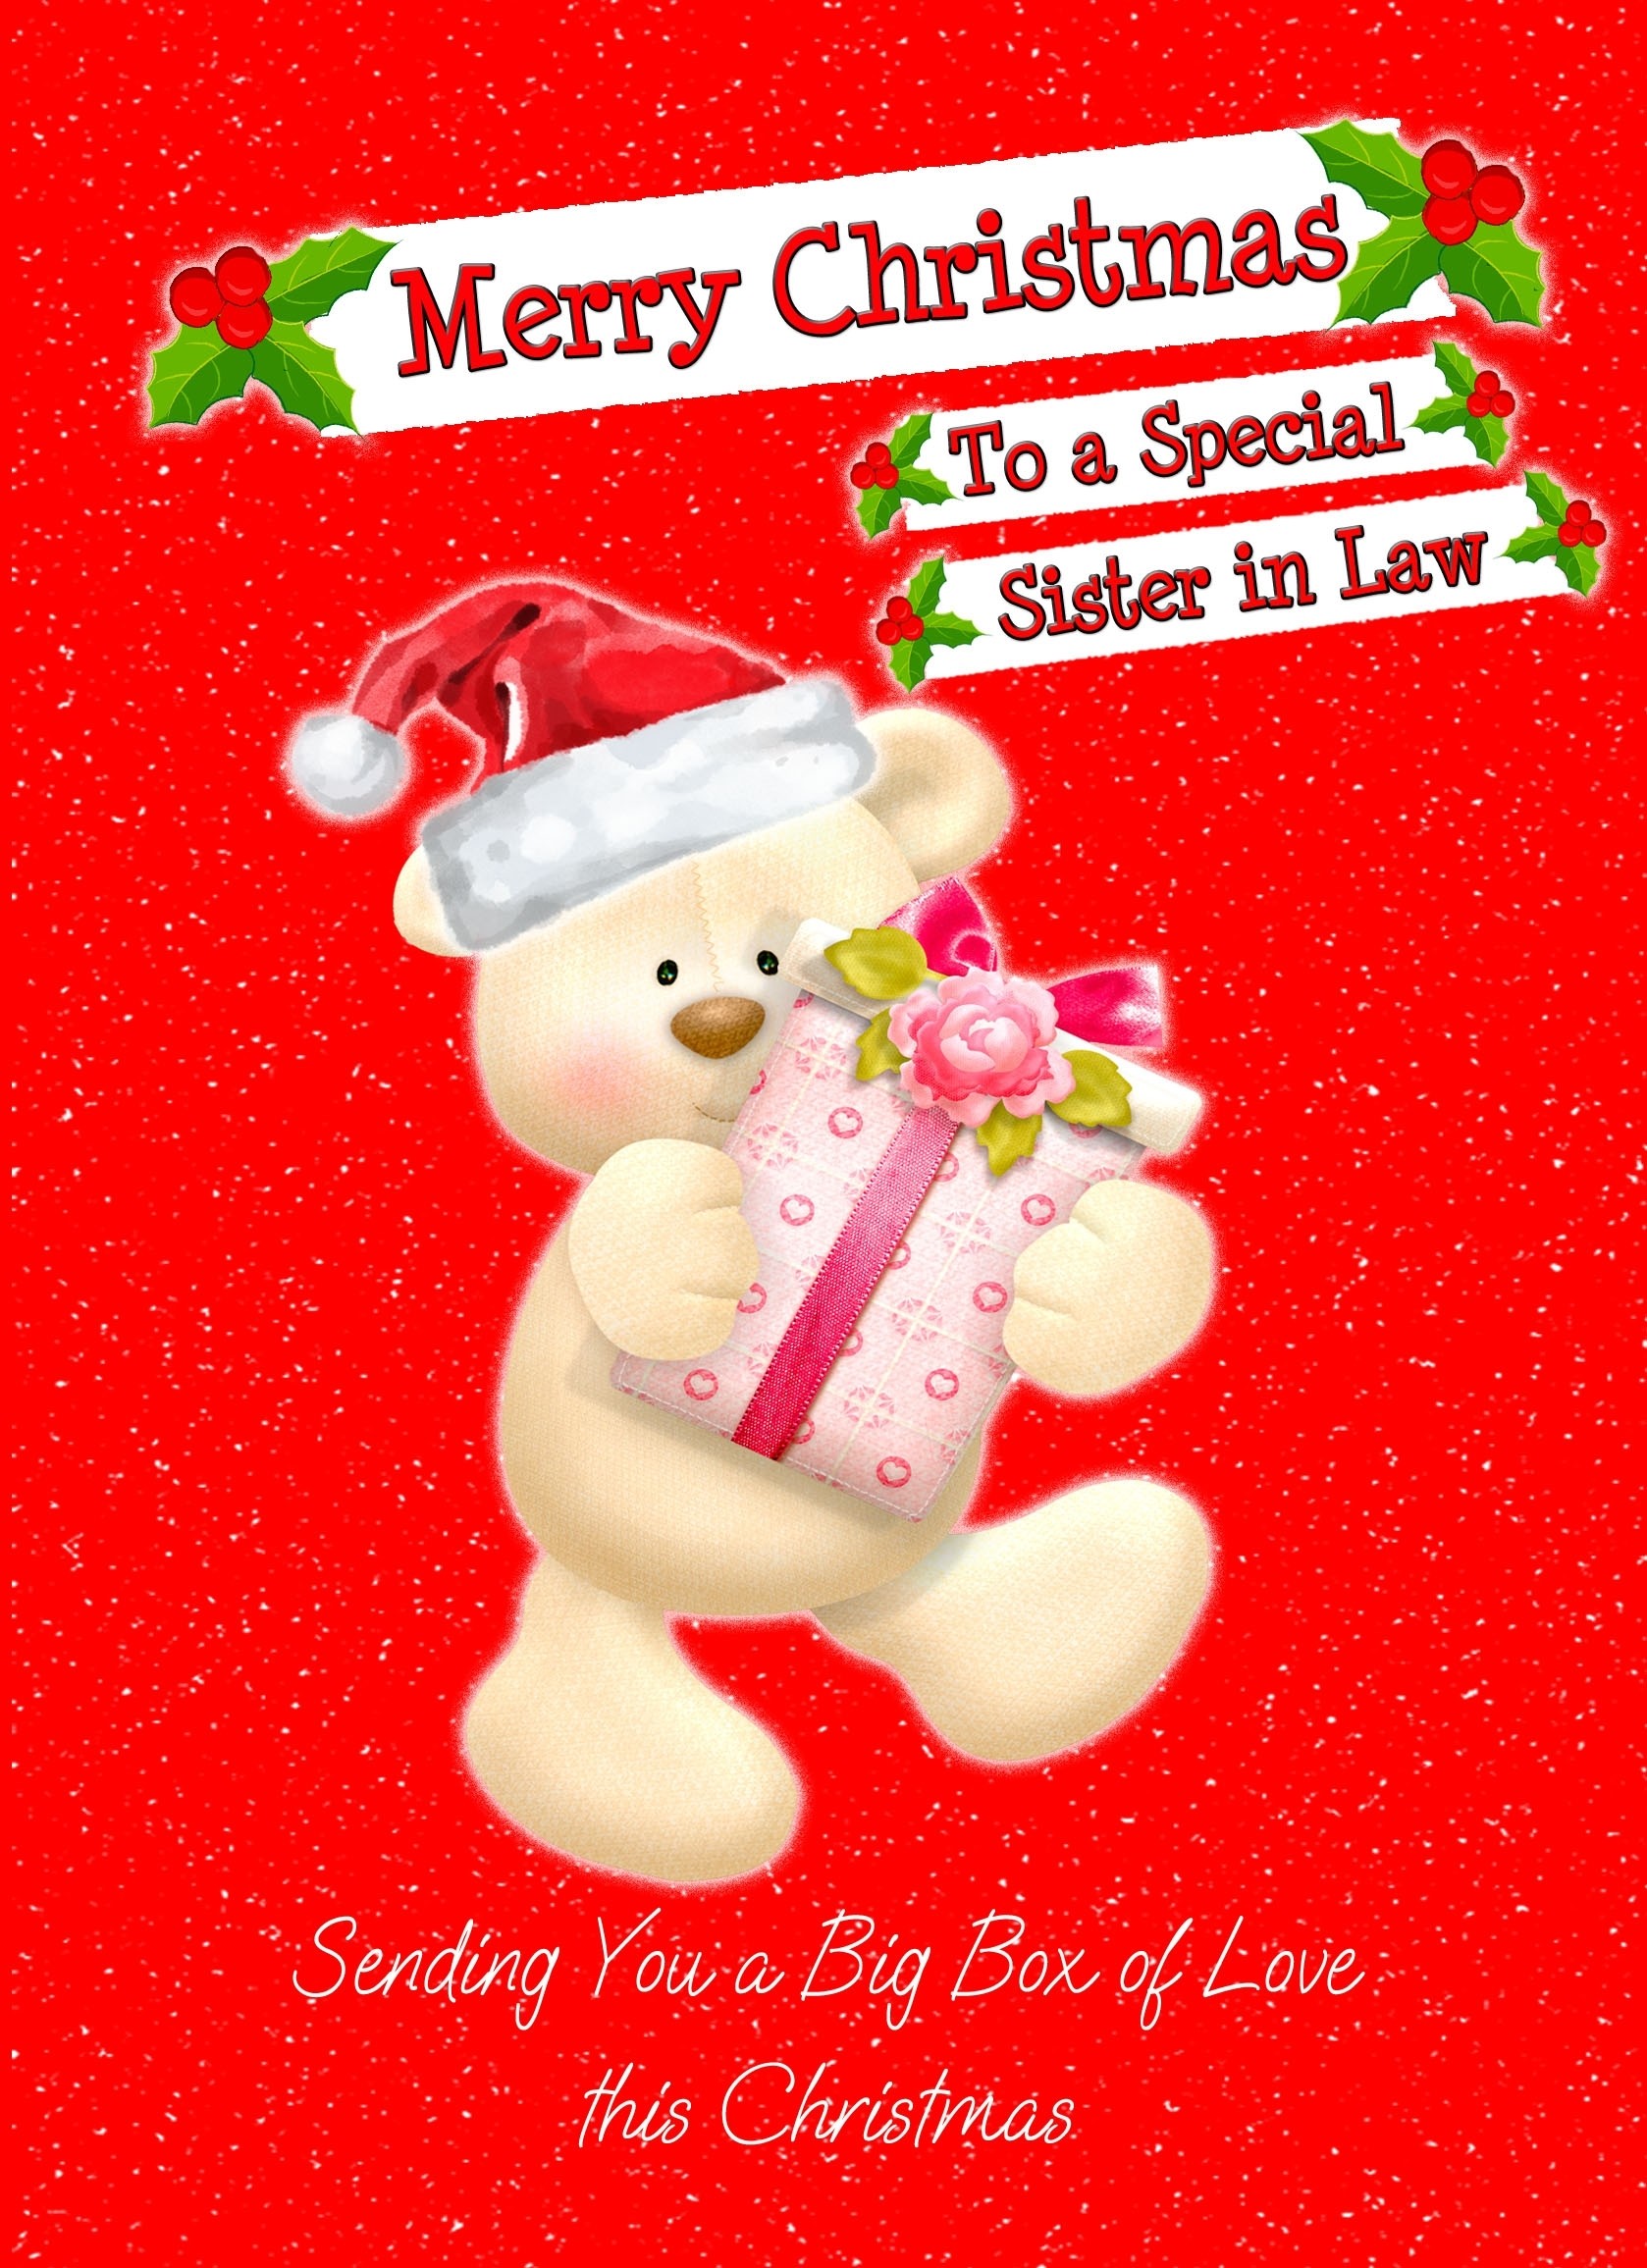 Christmas Card For Sister in Law (Red Bear)